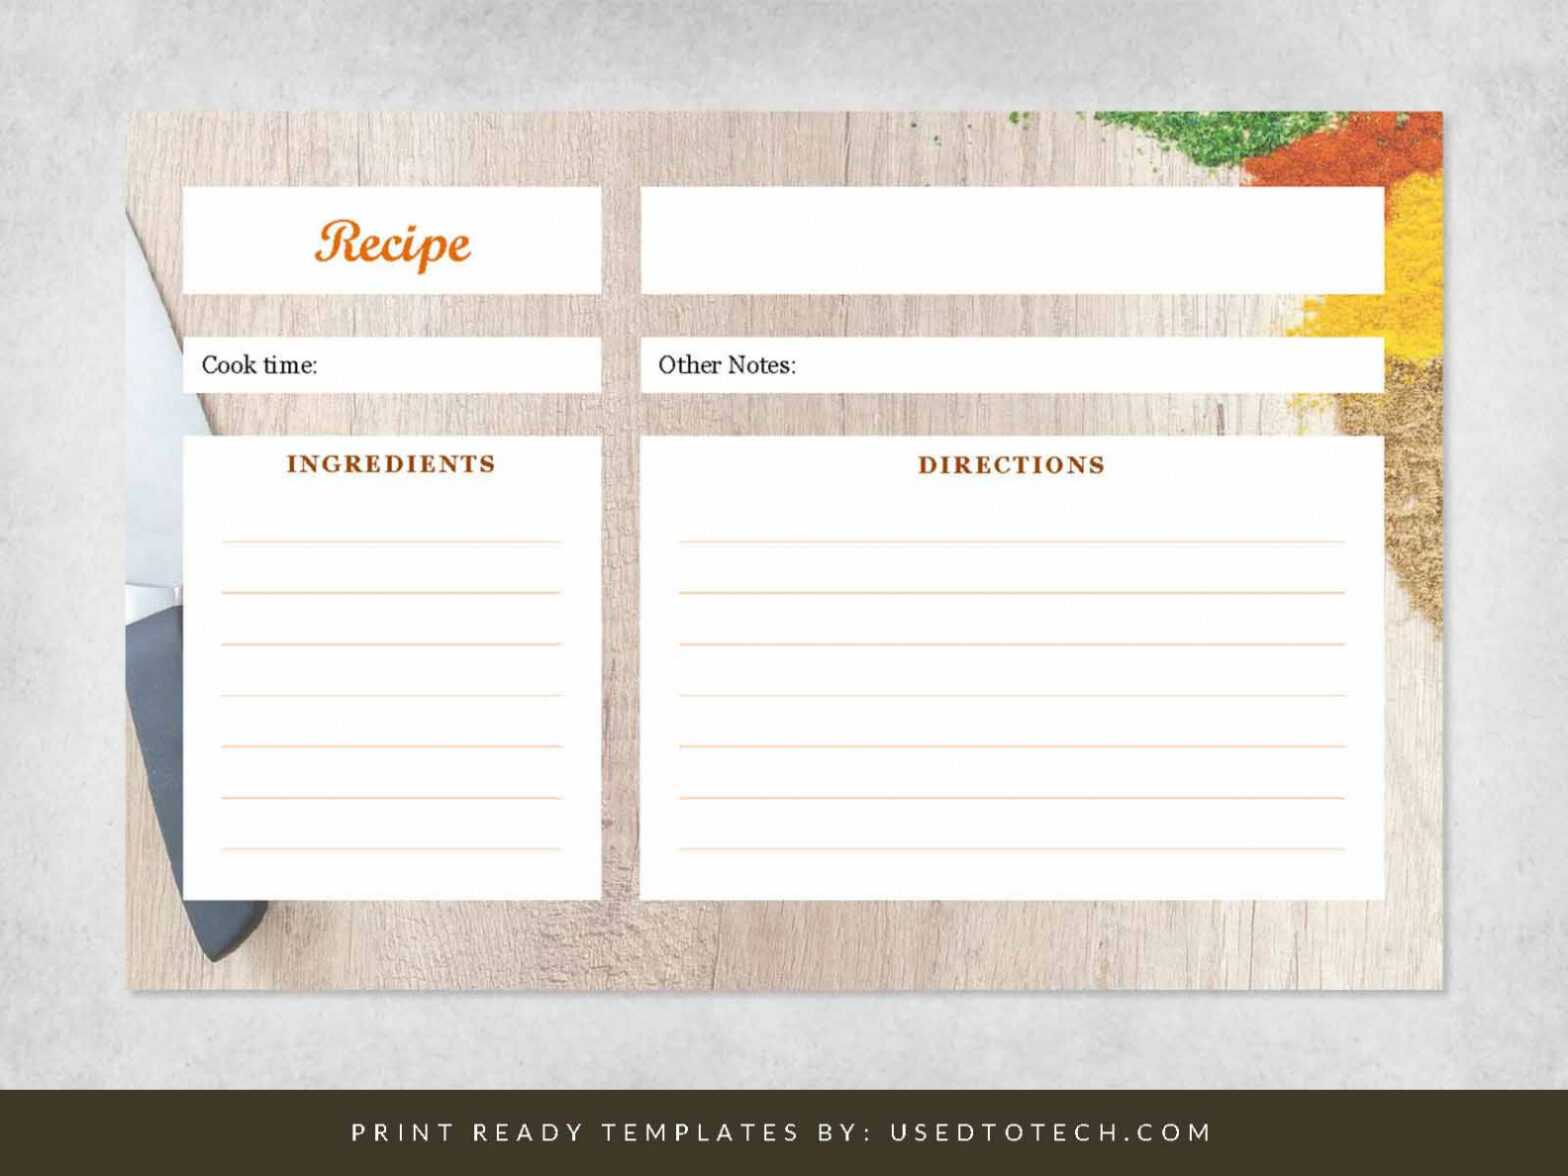 Fancy 4 X 6 Recipe Card Template For Word - Used To Tech throughout Fillable Recipe Card Template